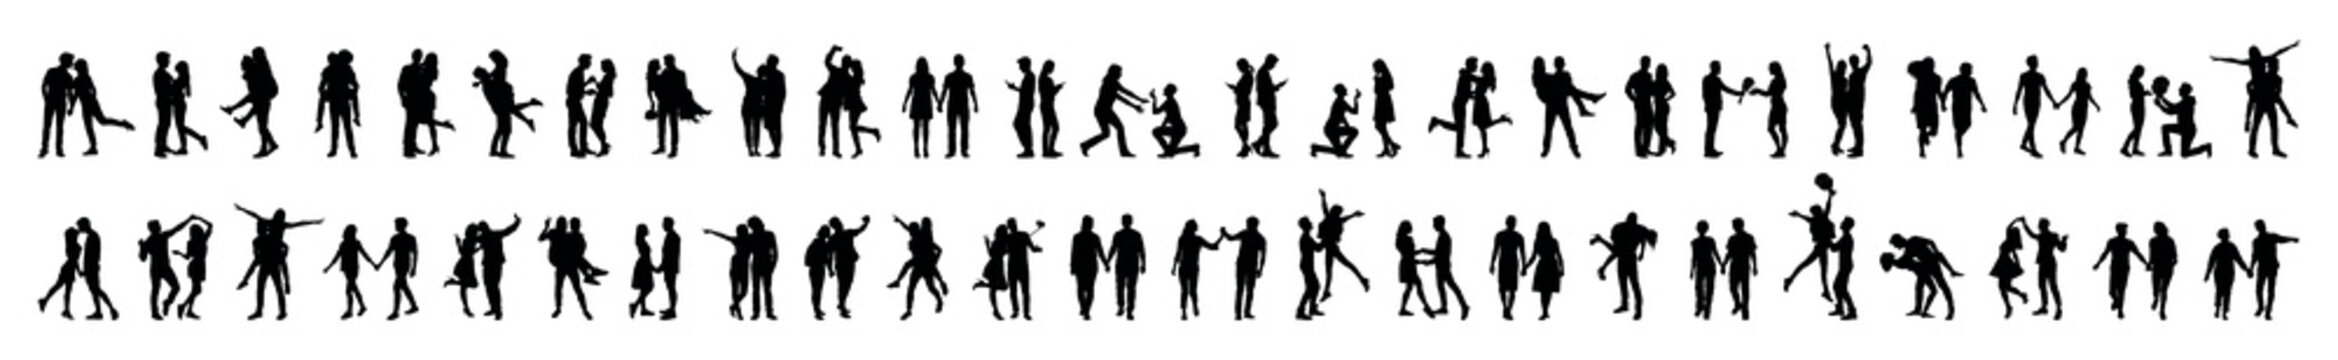 Couples falling in love various poses vector silhouette set collection.